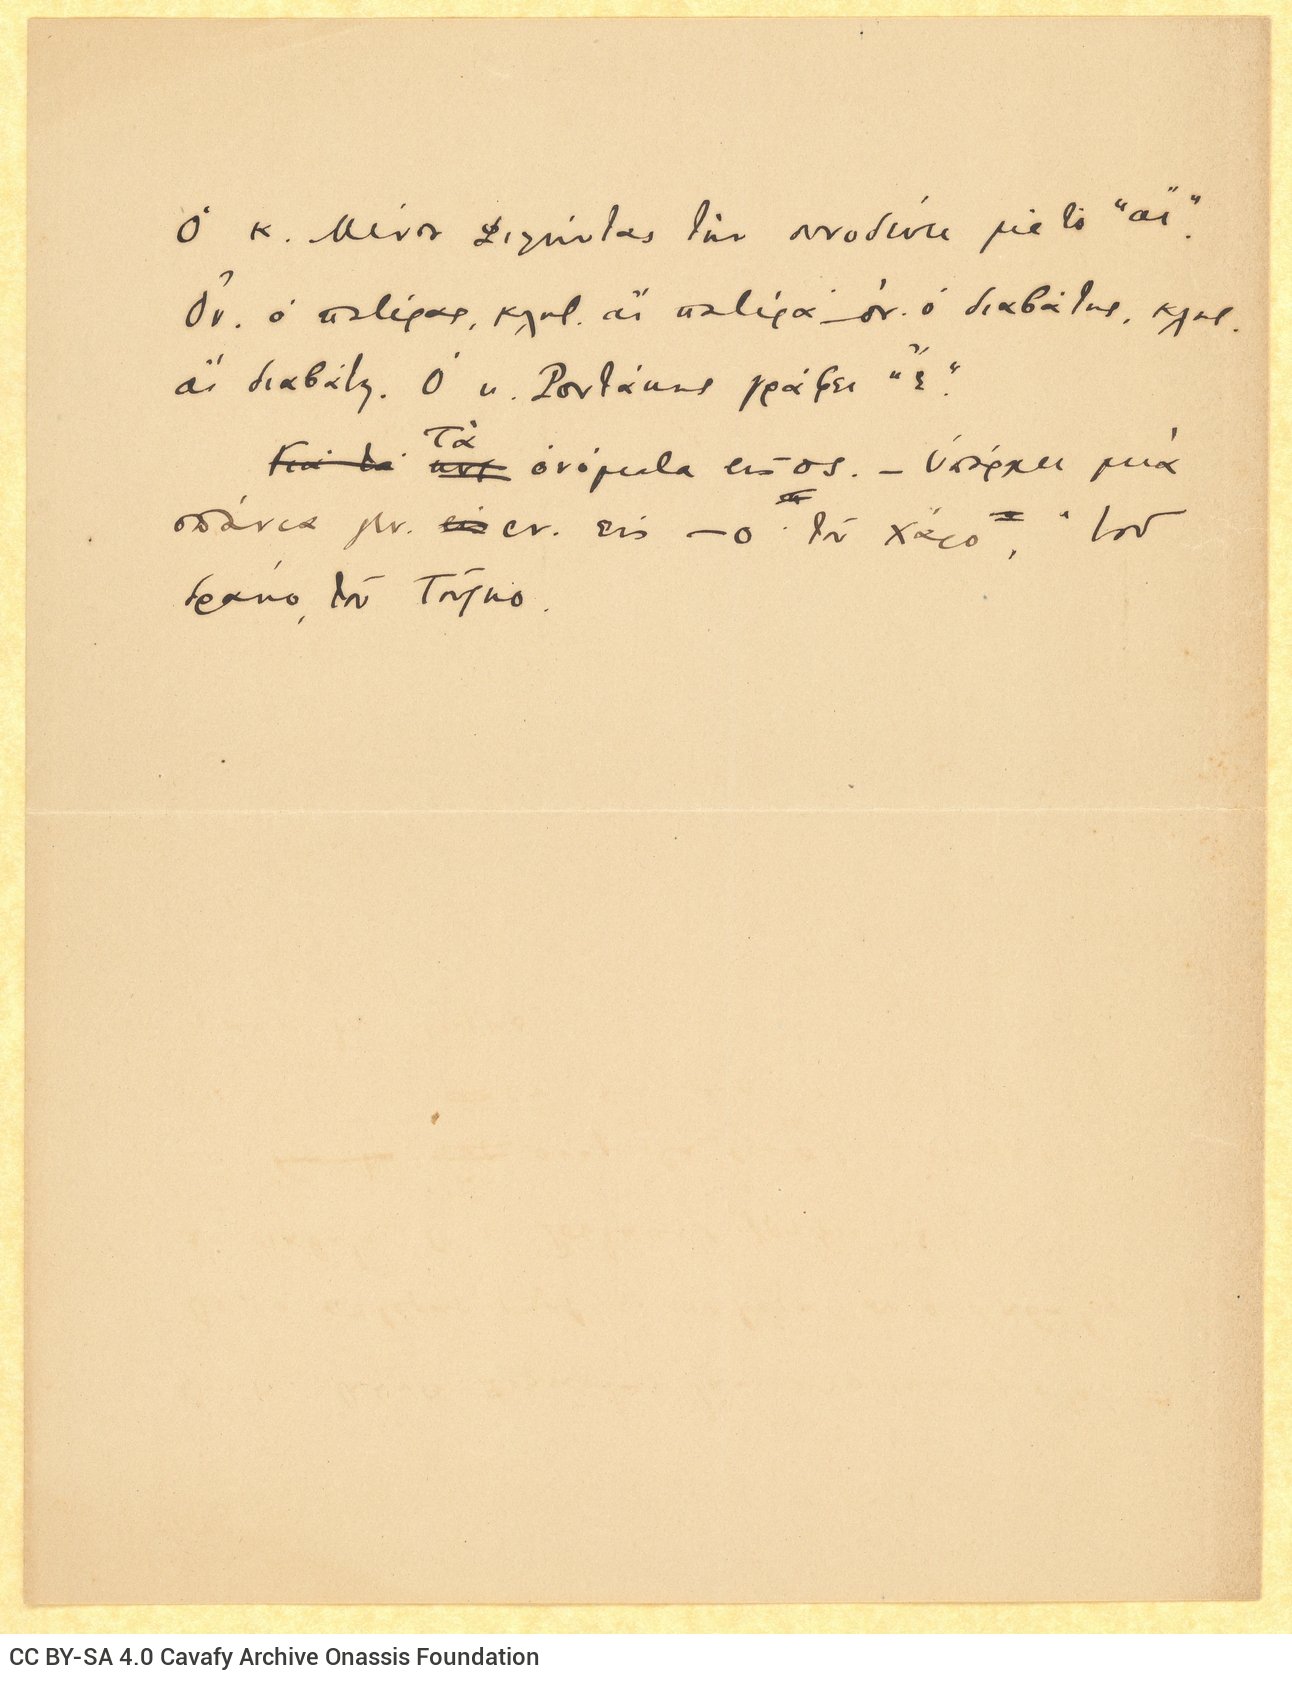 Handwritten note of linguistic content in the first page of a bifolio. The remaining pages are blank.